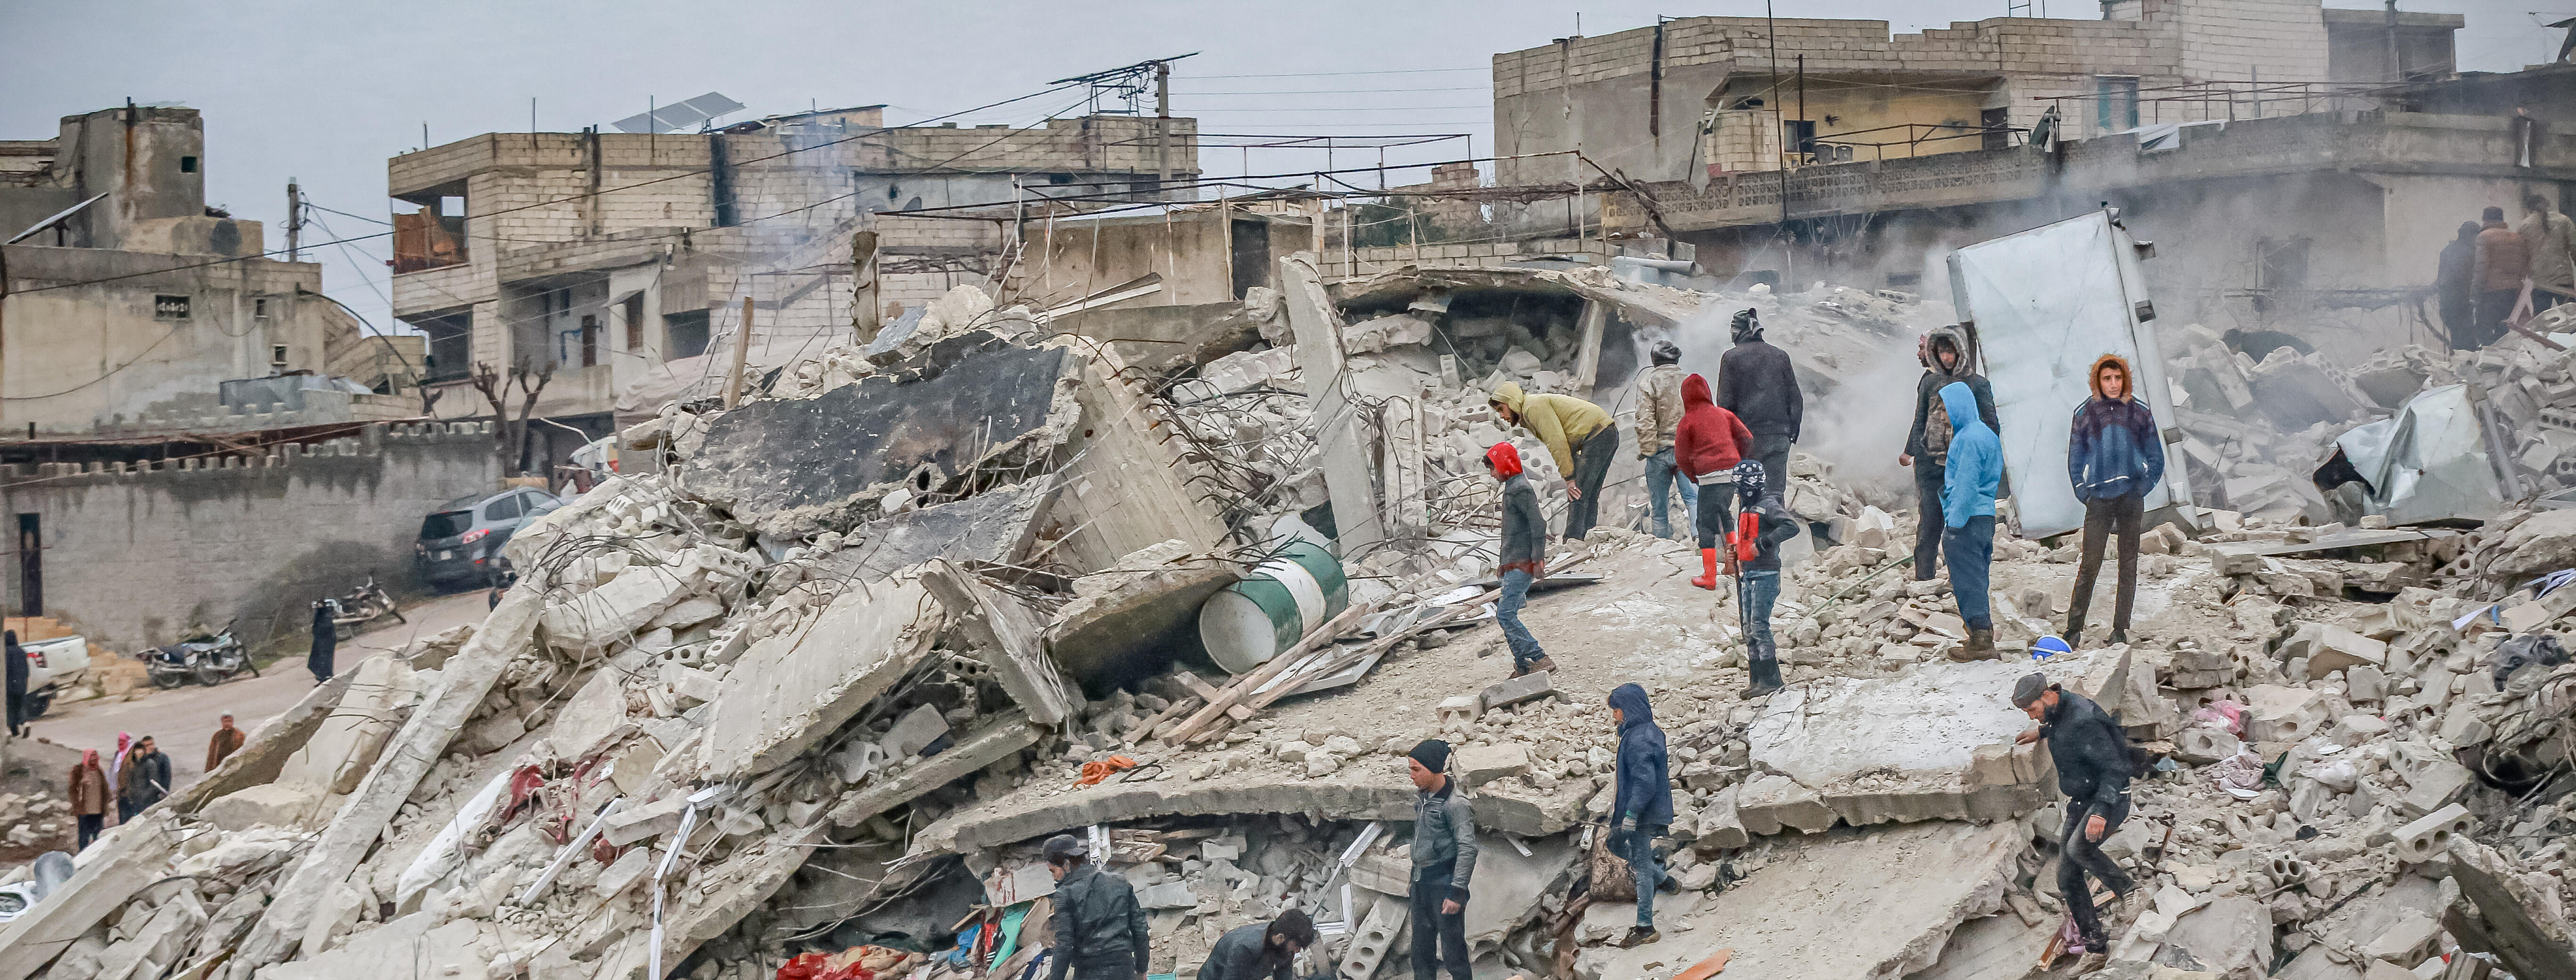 A crowd of medical personnel and civilians conduct search and rescue operations in the remains of destroyed buildings in Syria after the 7.7 earthquake on the morning of February 6, 2023. 